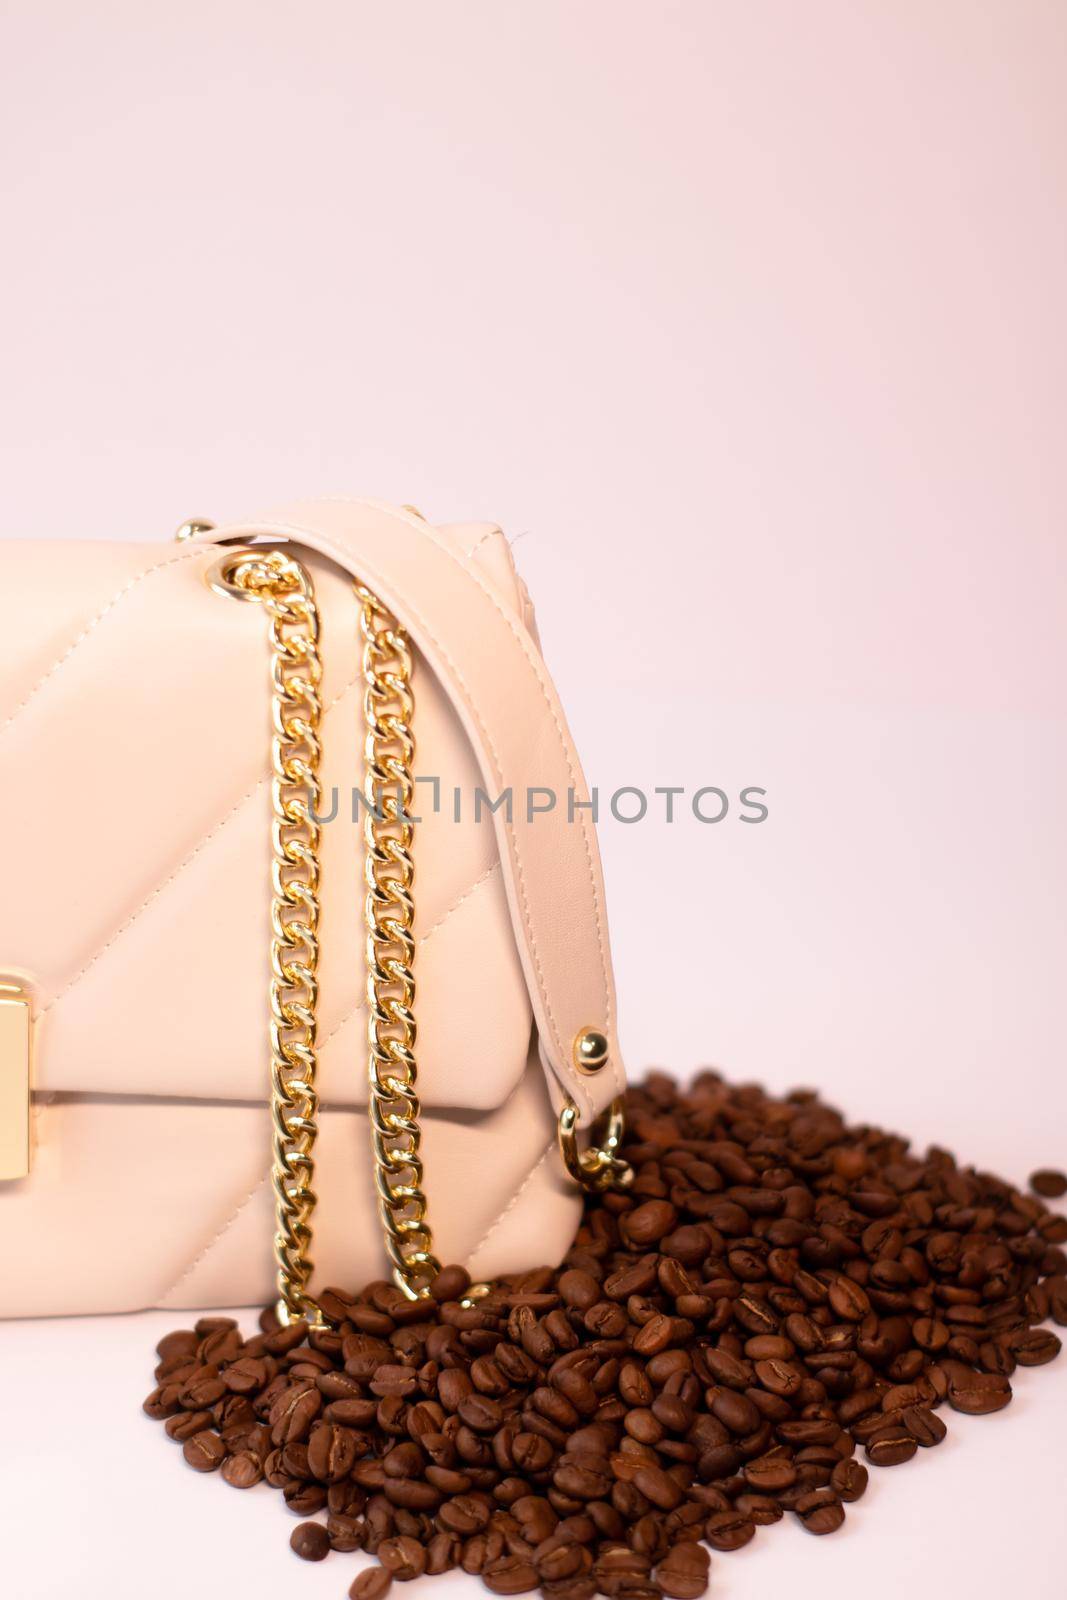 fashion beige leather woman handbag with gold chain with coffee beans nearby isolated on white background. Product photography. bags and purses for women.